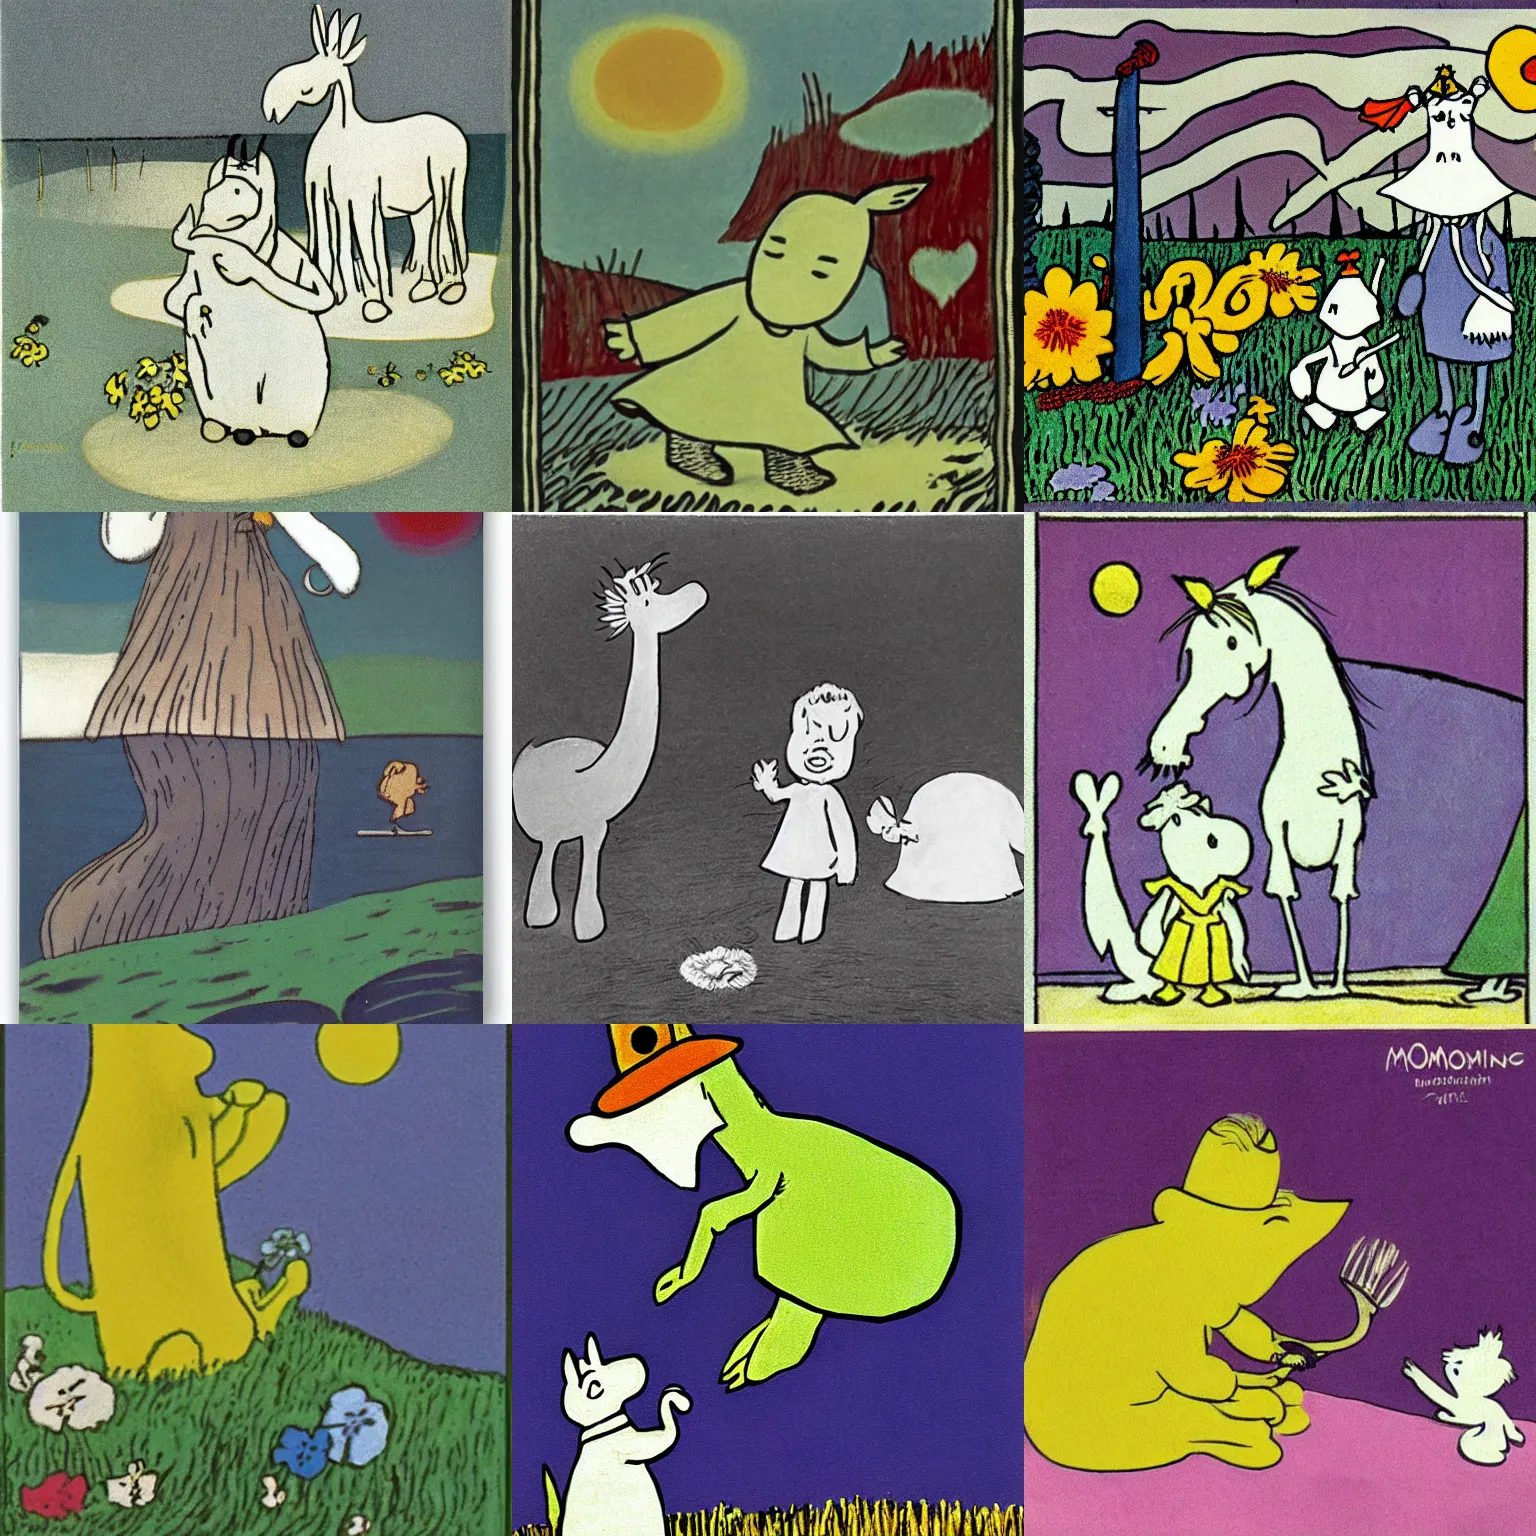 Prompt: moomintroll, by tove jansson